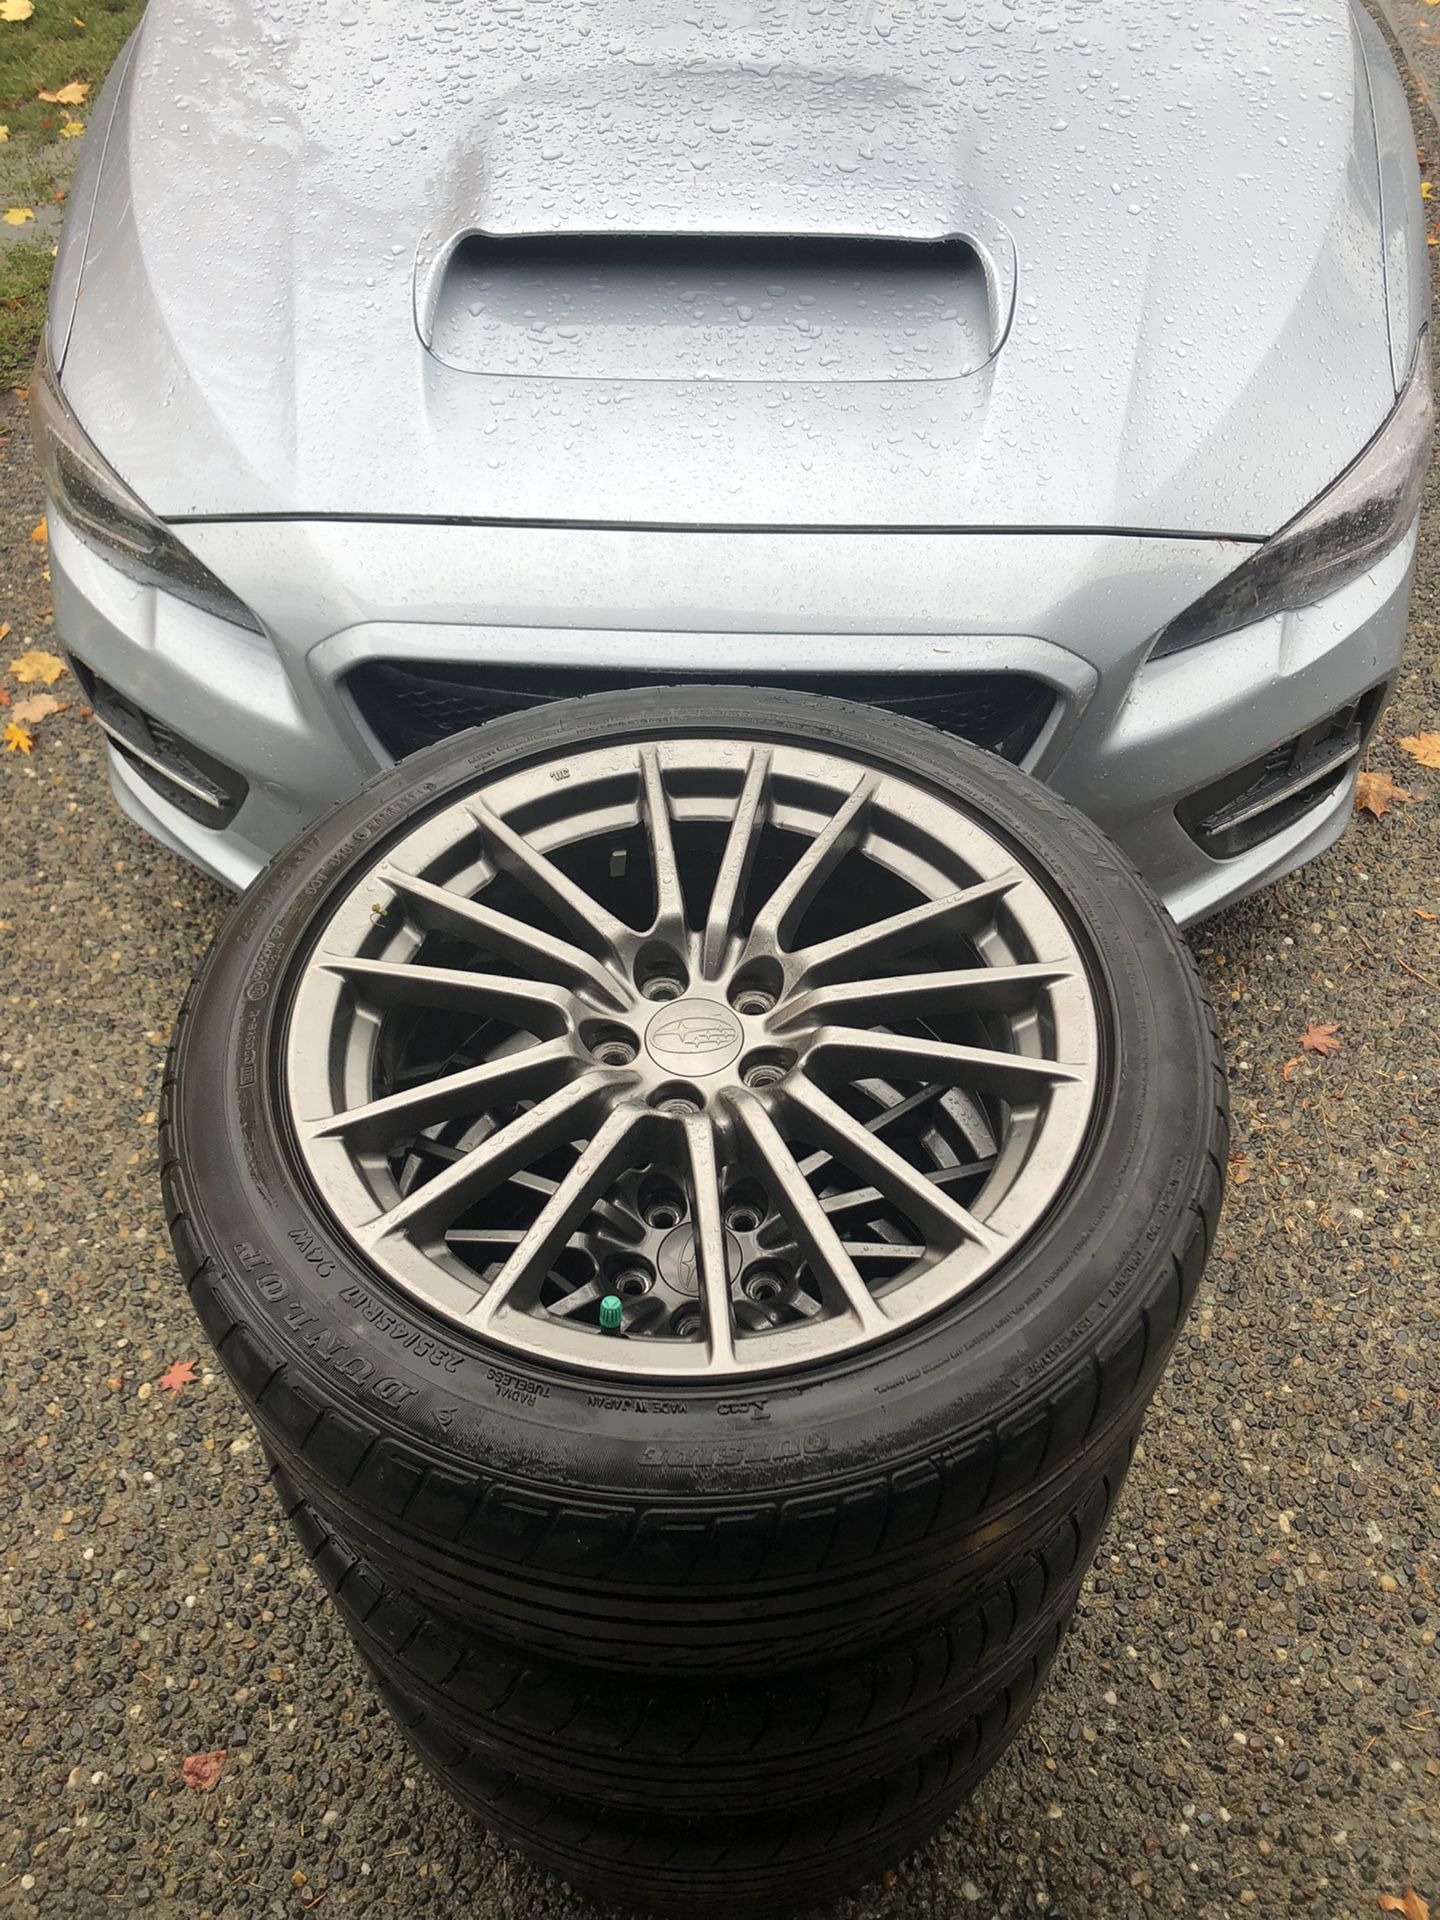 5x100 235 45 17 Subaru Factory Rims And Tires As Is On Picture Dunlop SP SPORT 01 Priced To Sell